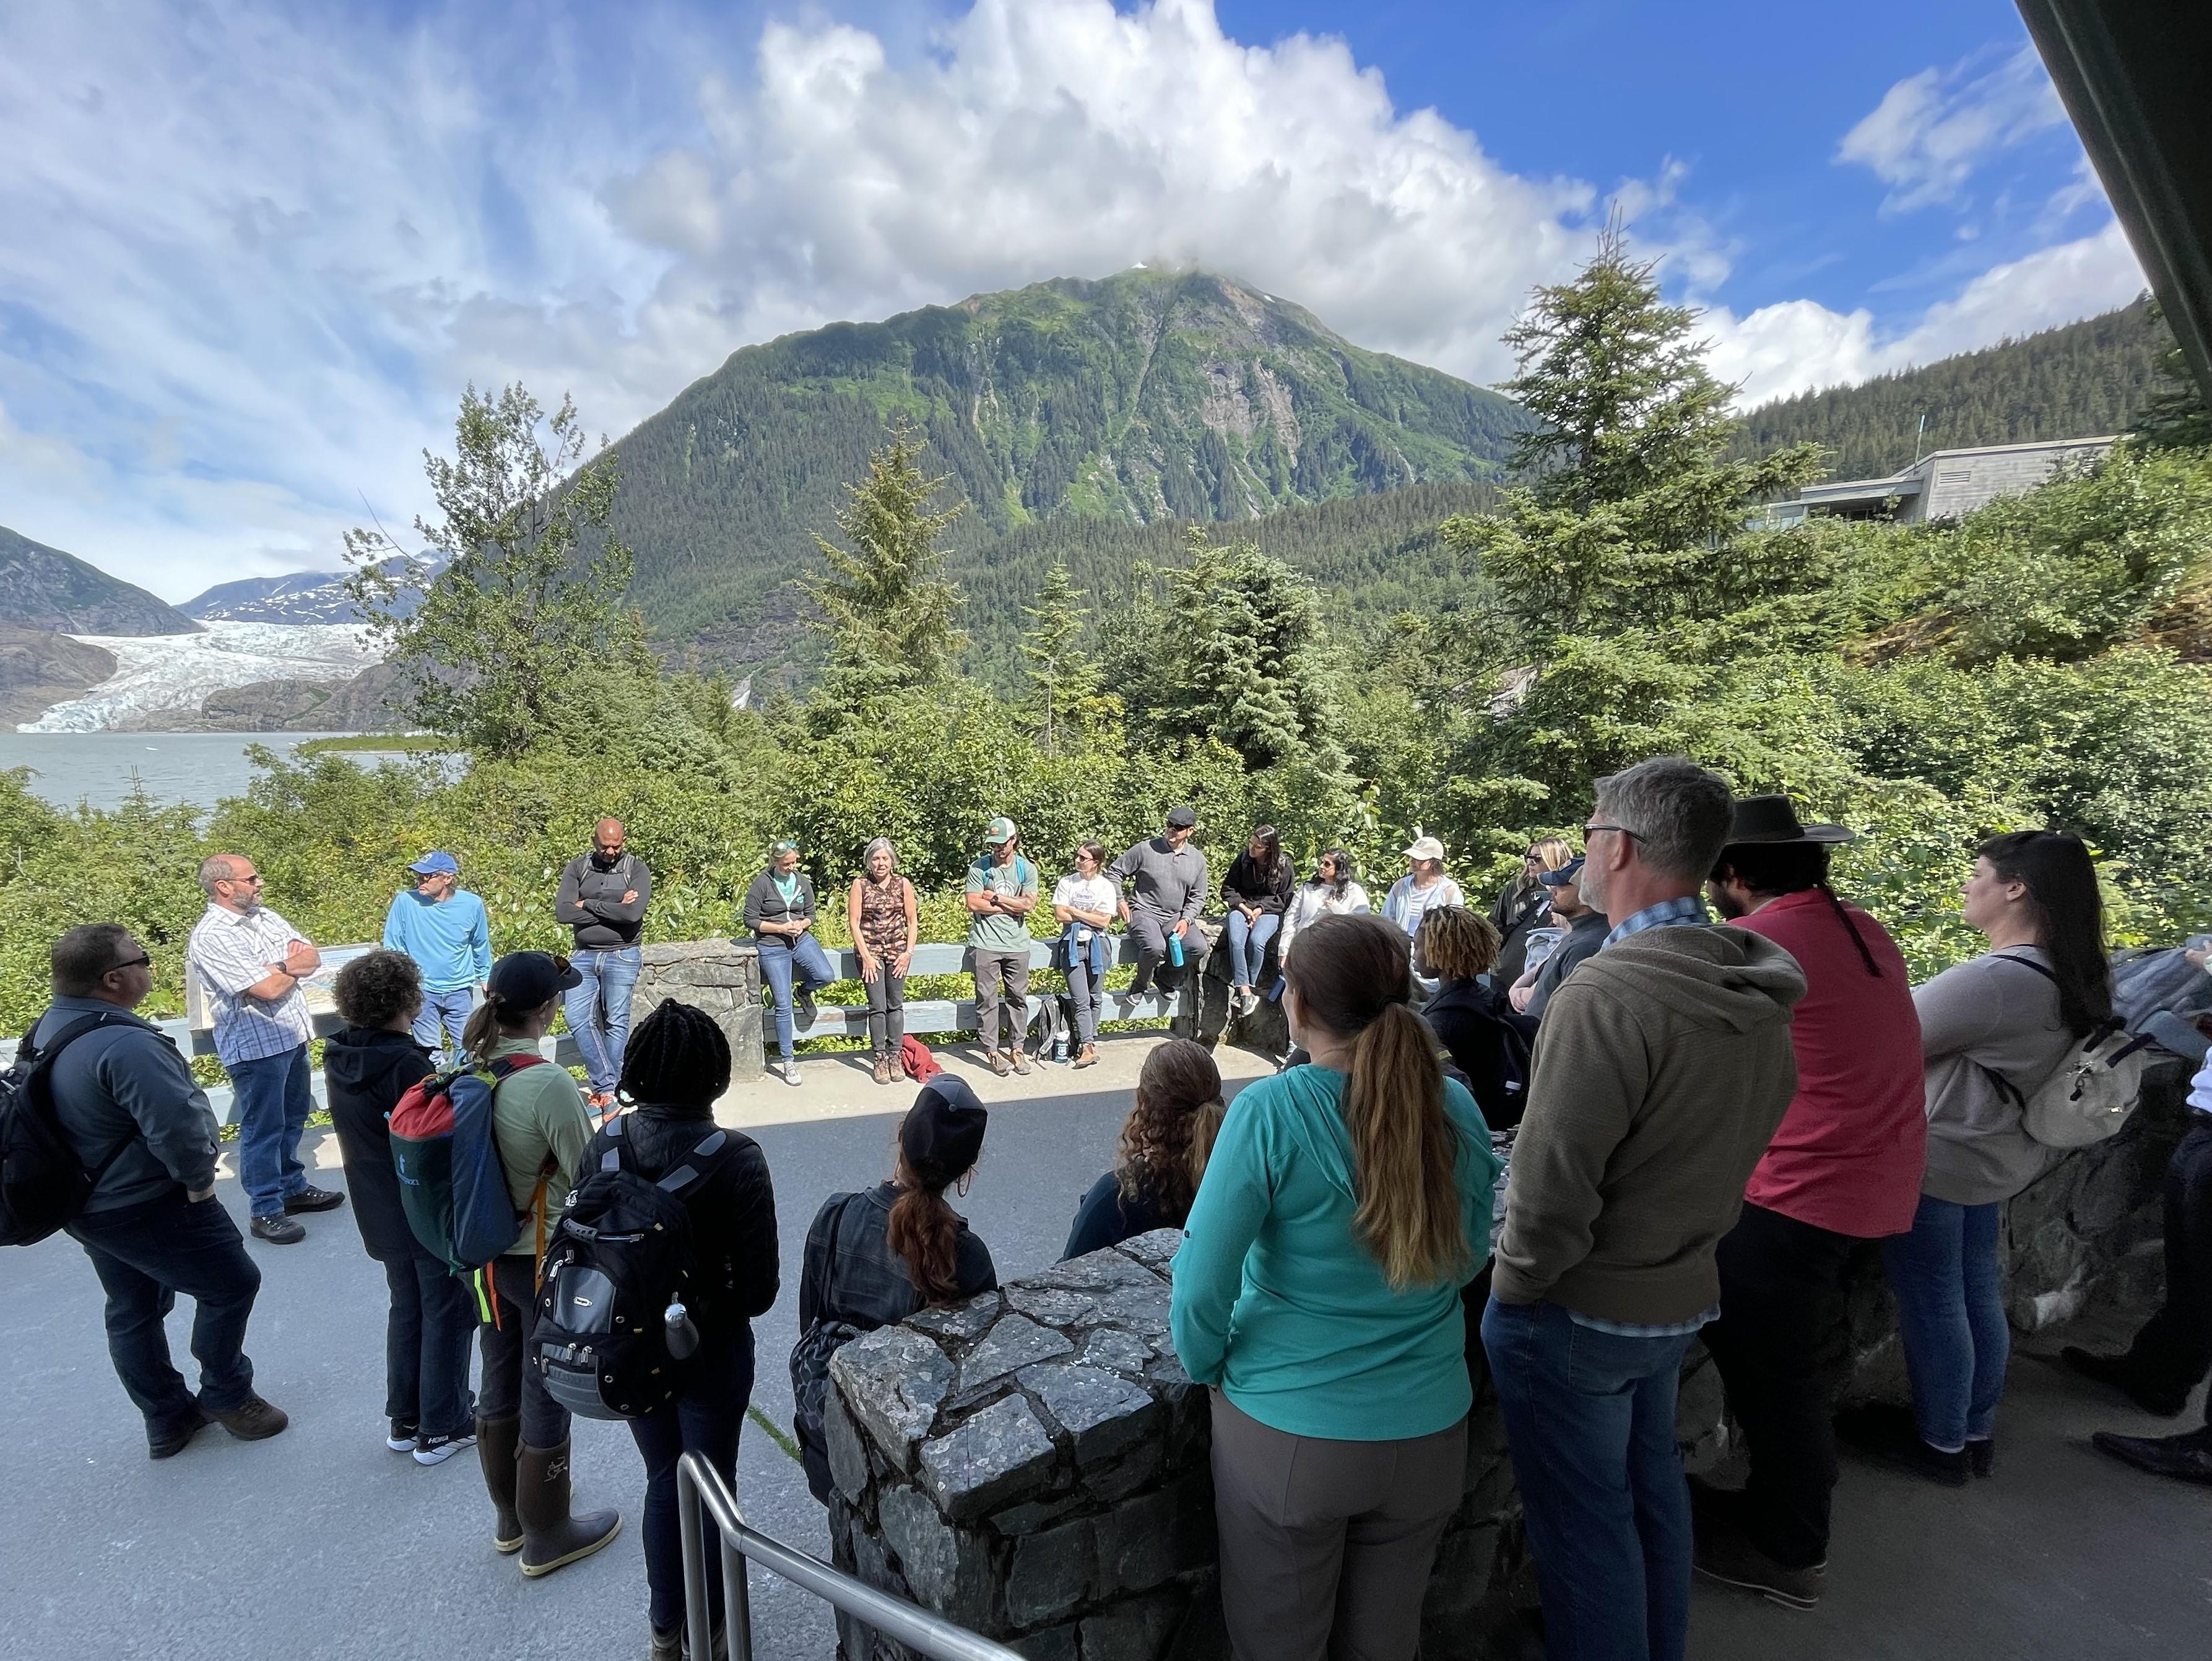 A group of people standing in a circle and talking in front of a background of trees and a glacier.